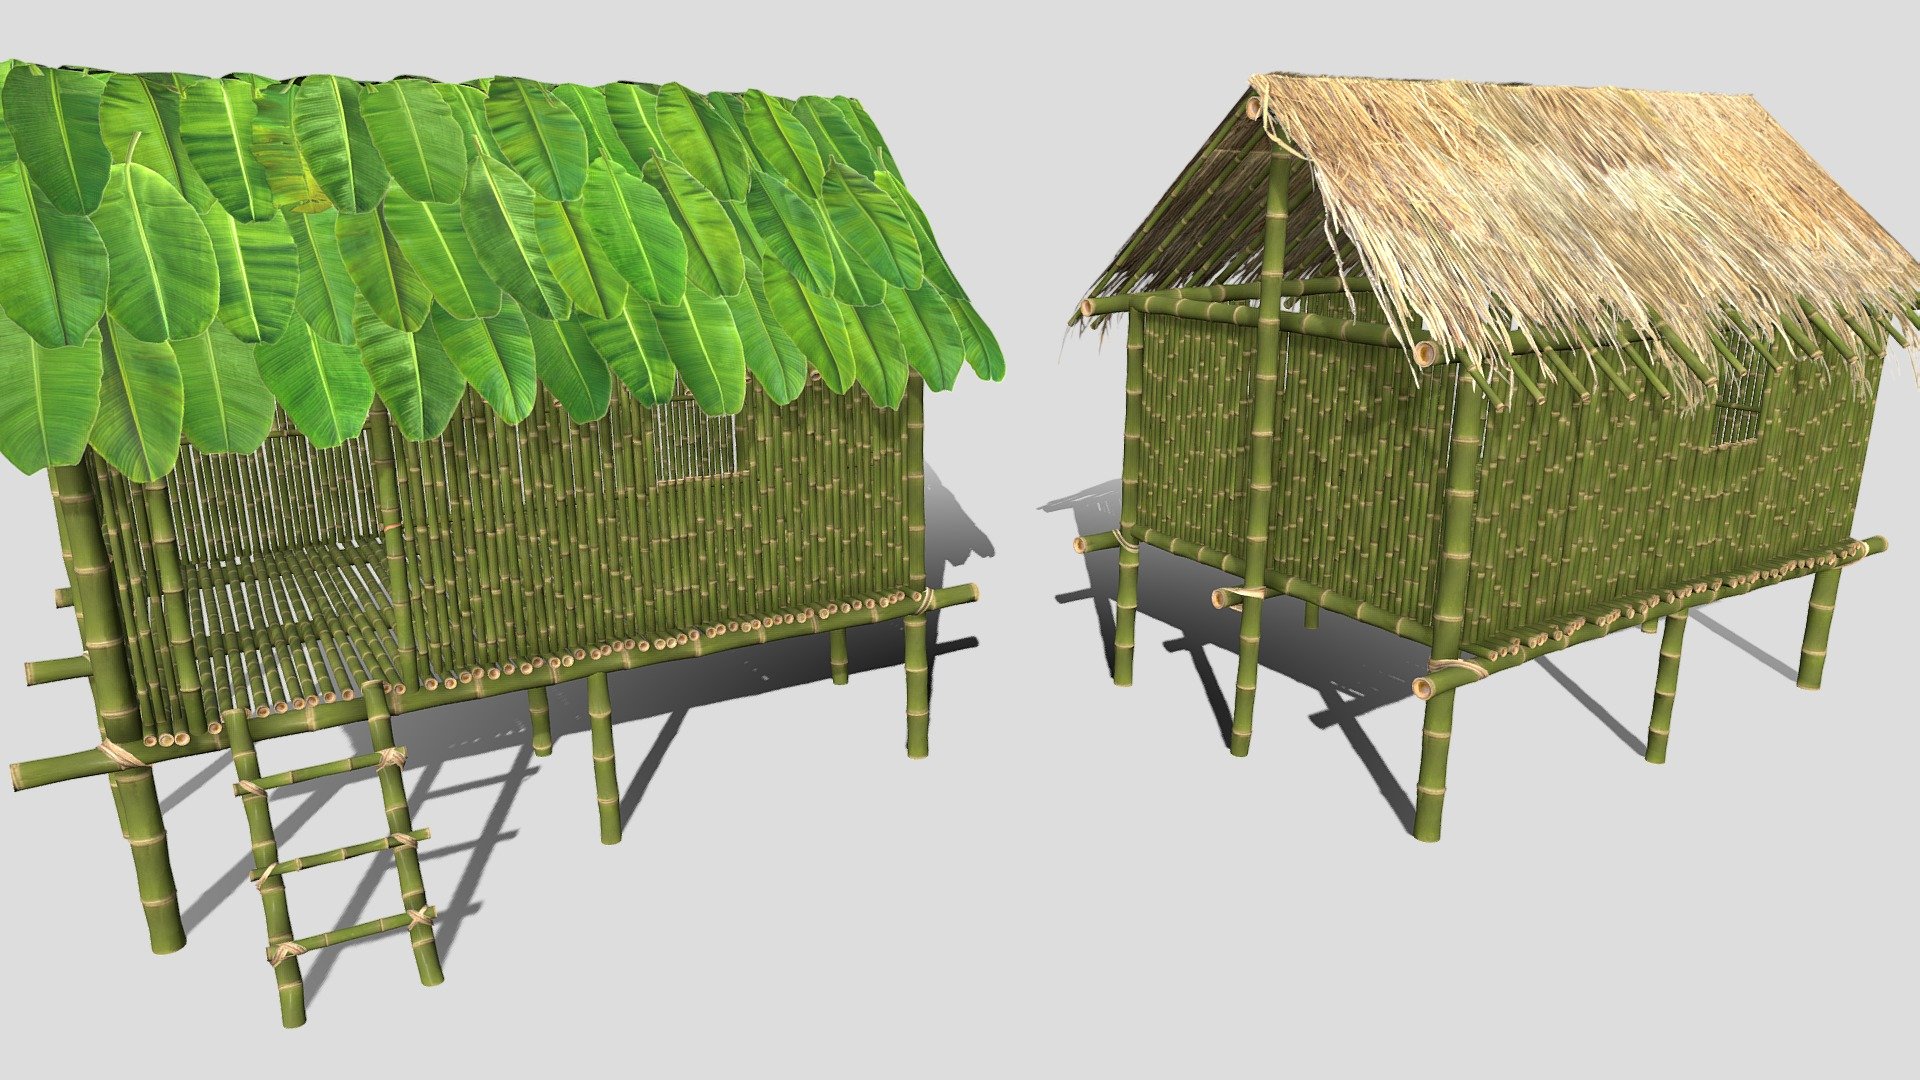 Bamboo jungle hut with banana and palm leaf roof - Jungle Hut - 3D model by Buncic 3d model